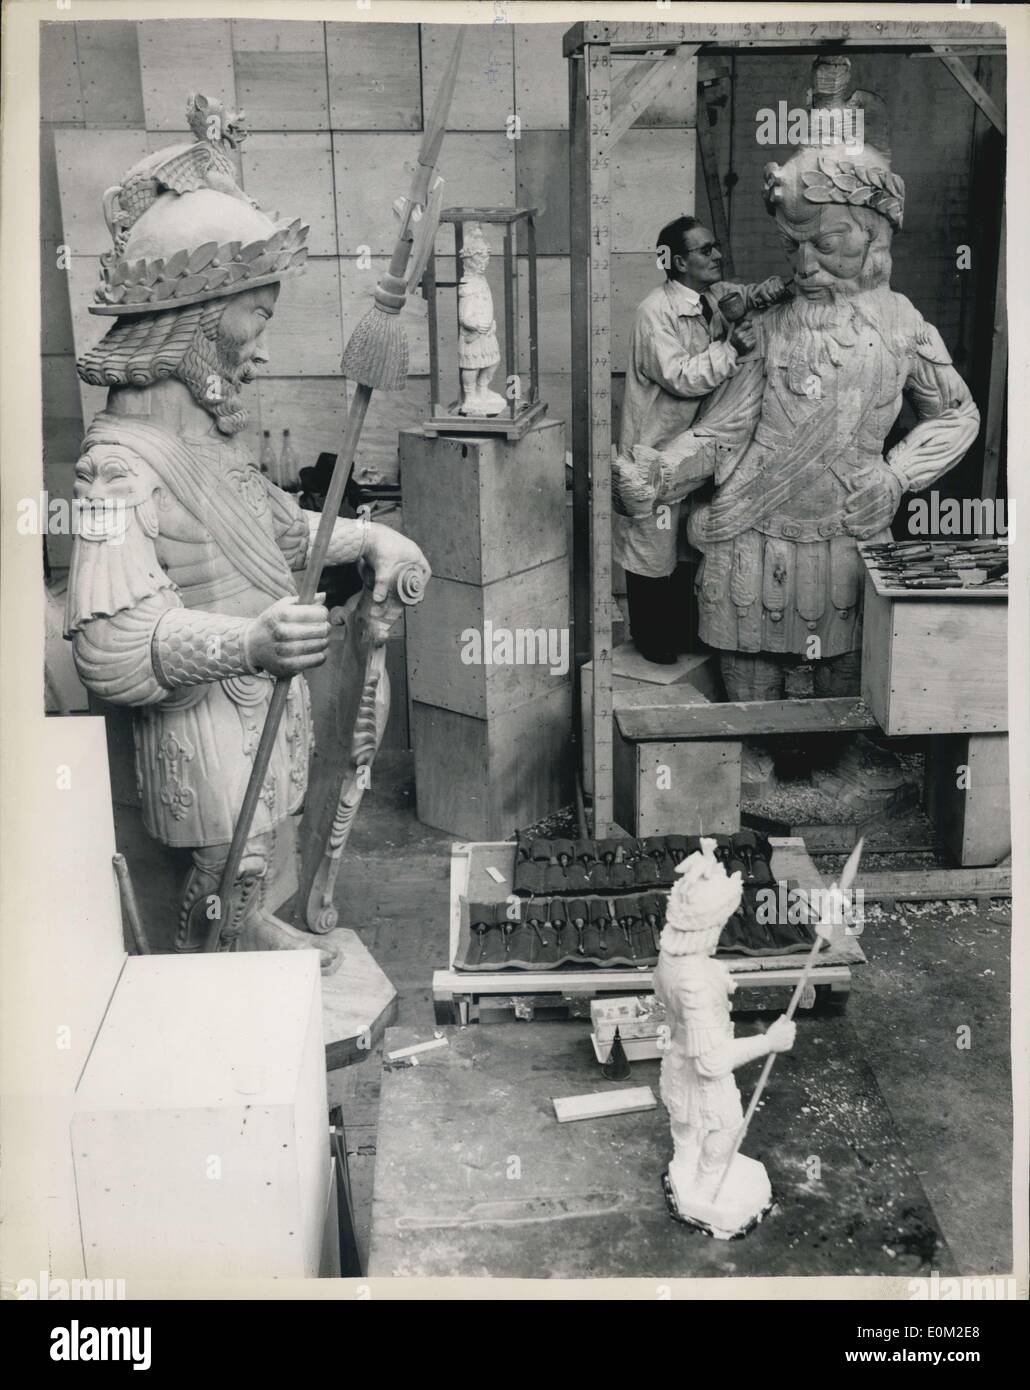 Mar. 11, 1953 - Work Progresses On The Statues Of ''Gog'' And ''Magog'' For Return To The Guildhall: Work nears completion at the Welwyn Evans - on the new statues of the famous Guildhall ''Gog'' and ''Magog'' - which are to replace the triginals which were destroyed by German fire-bombs in 1940. The statues are 9ft.3 ins. in height (the originals were 14 ft). The sculpture is being financed by Sir George Wilkinson, former Lord Mayor of London - and the statues are to be placed in position in time for Coronation Day. Photo shows Mr Stock Photo